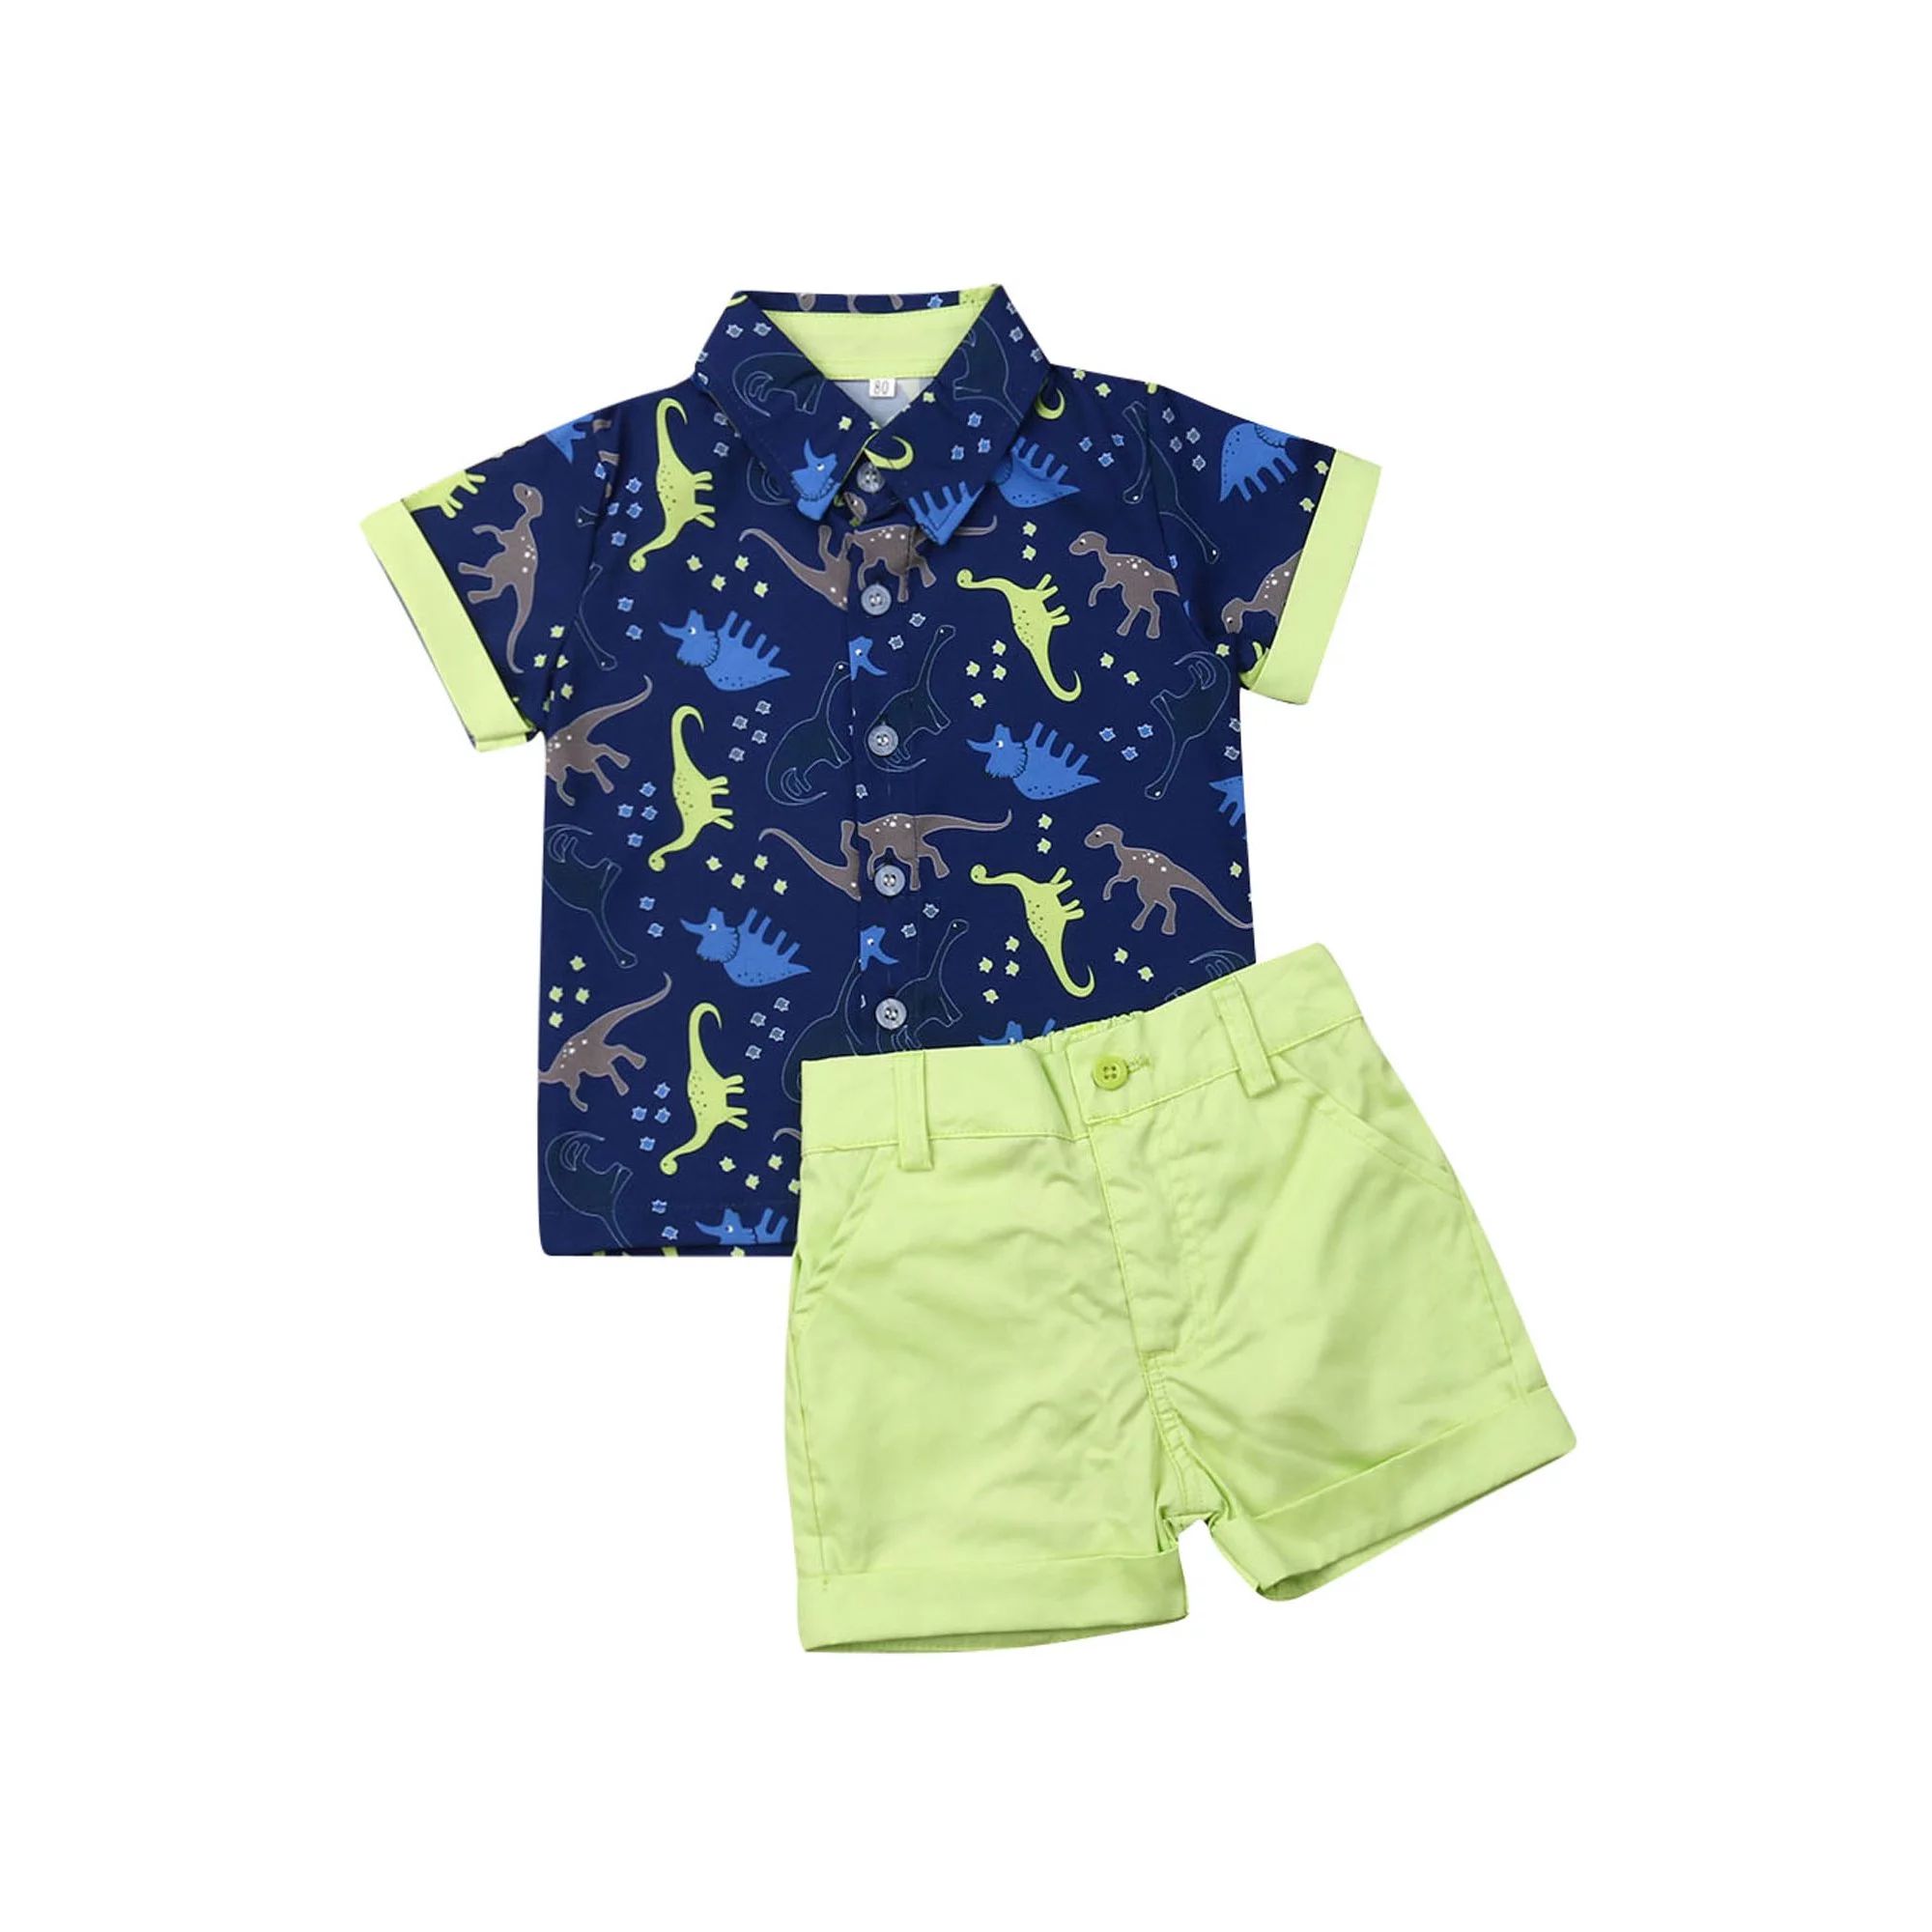 TheFound Toddler Baby Boy Short Sleeve Button Down Shirt Shorts Set 1T 2T 3T 4T 5T Outfits Summer... | Walmart (US)